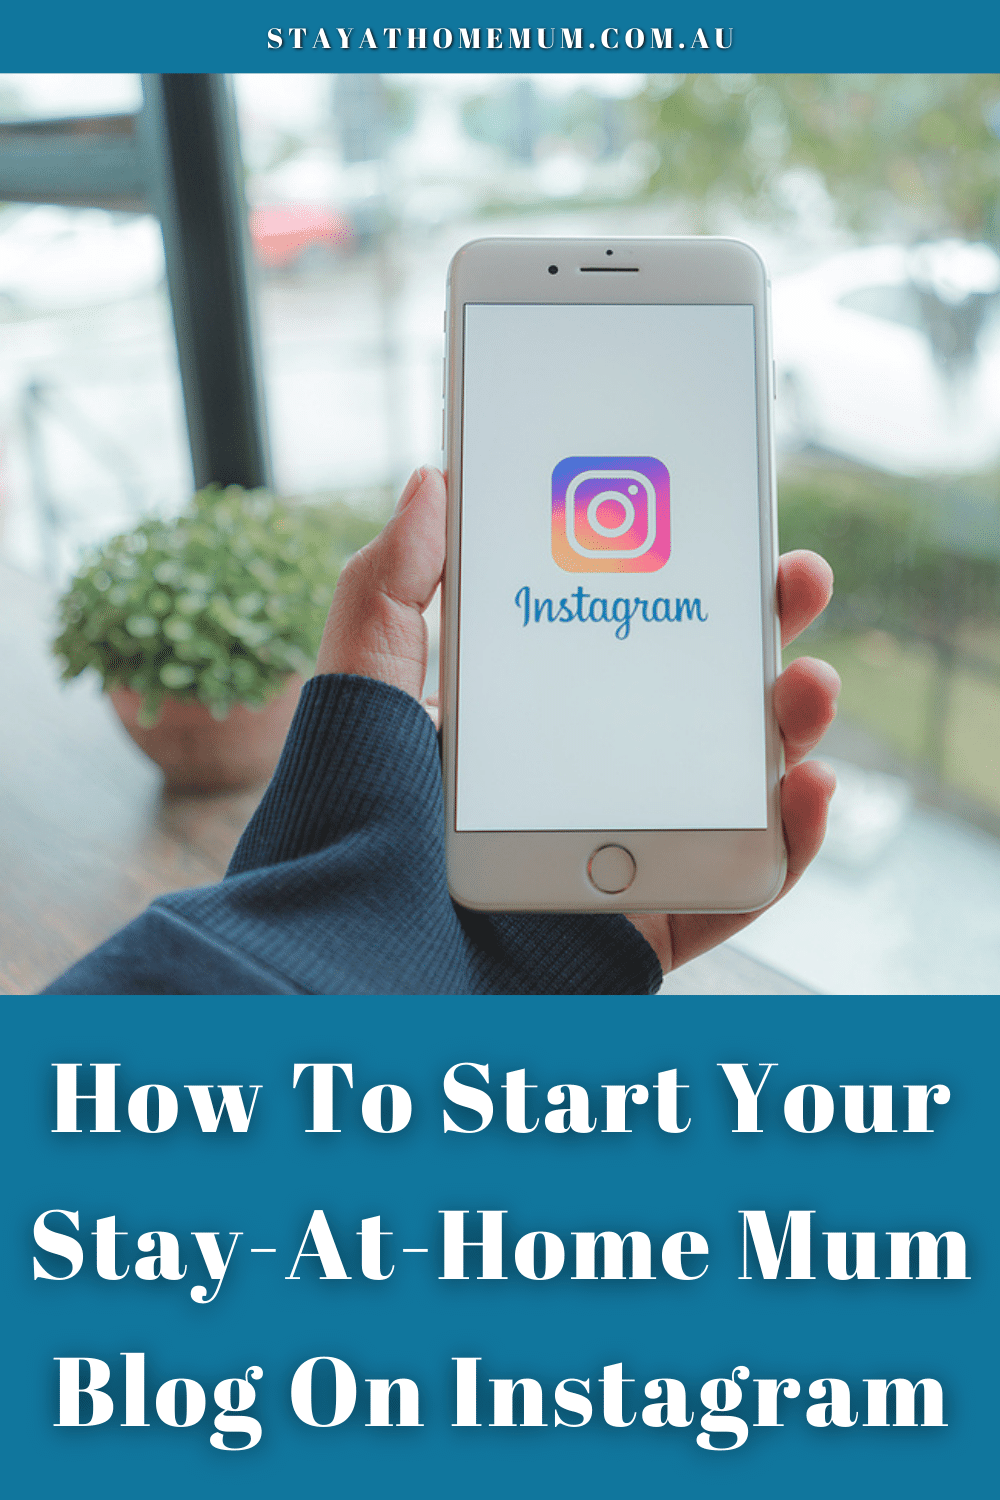 How To Start Your Stay-At-Home Mum Blog On Instagram | Stay At Home Mum